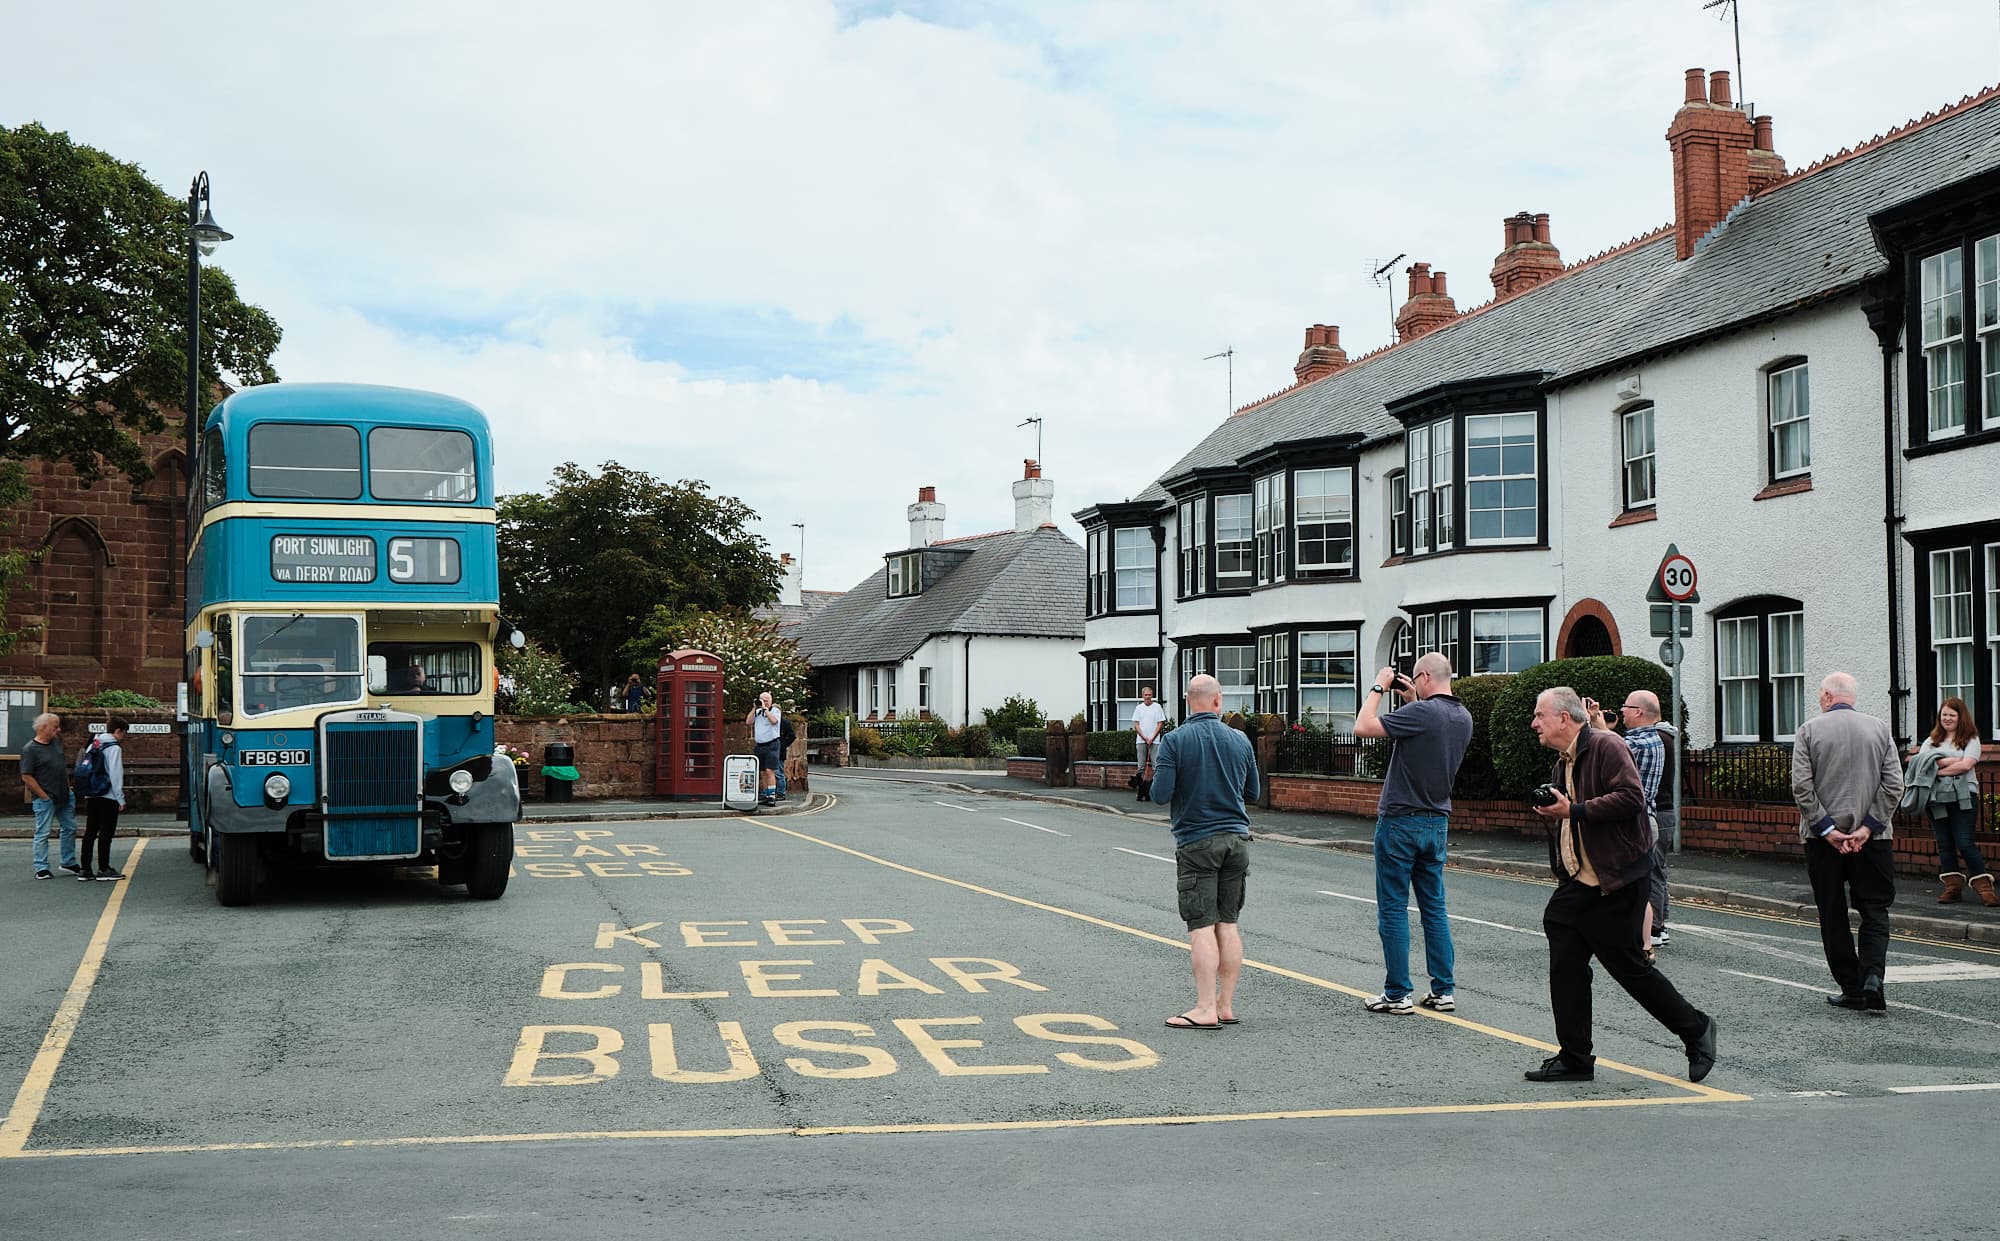 a classic bus attracting attention